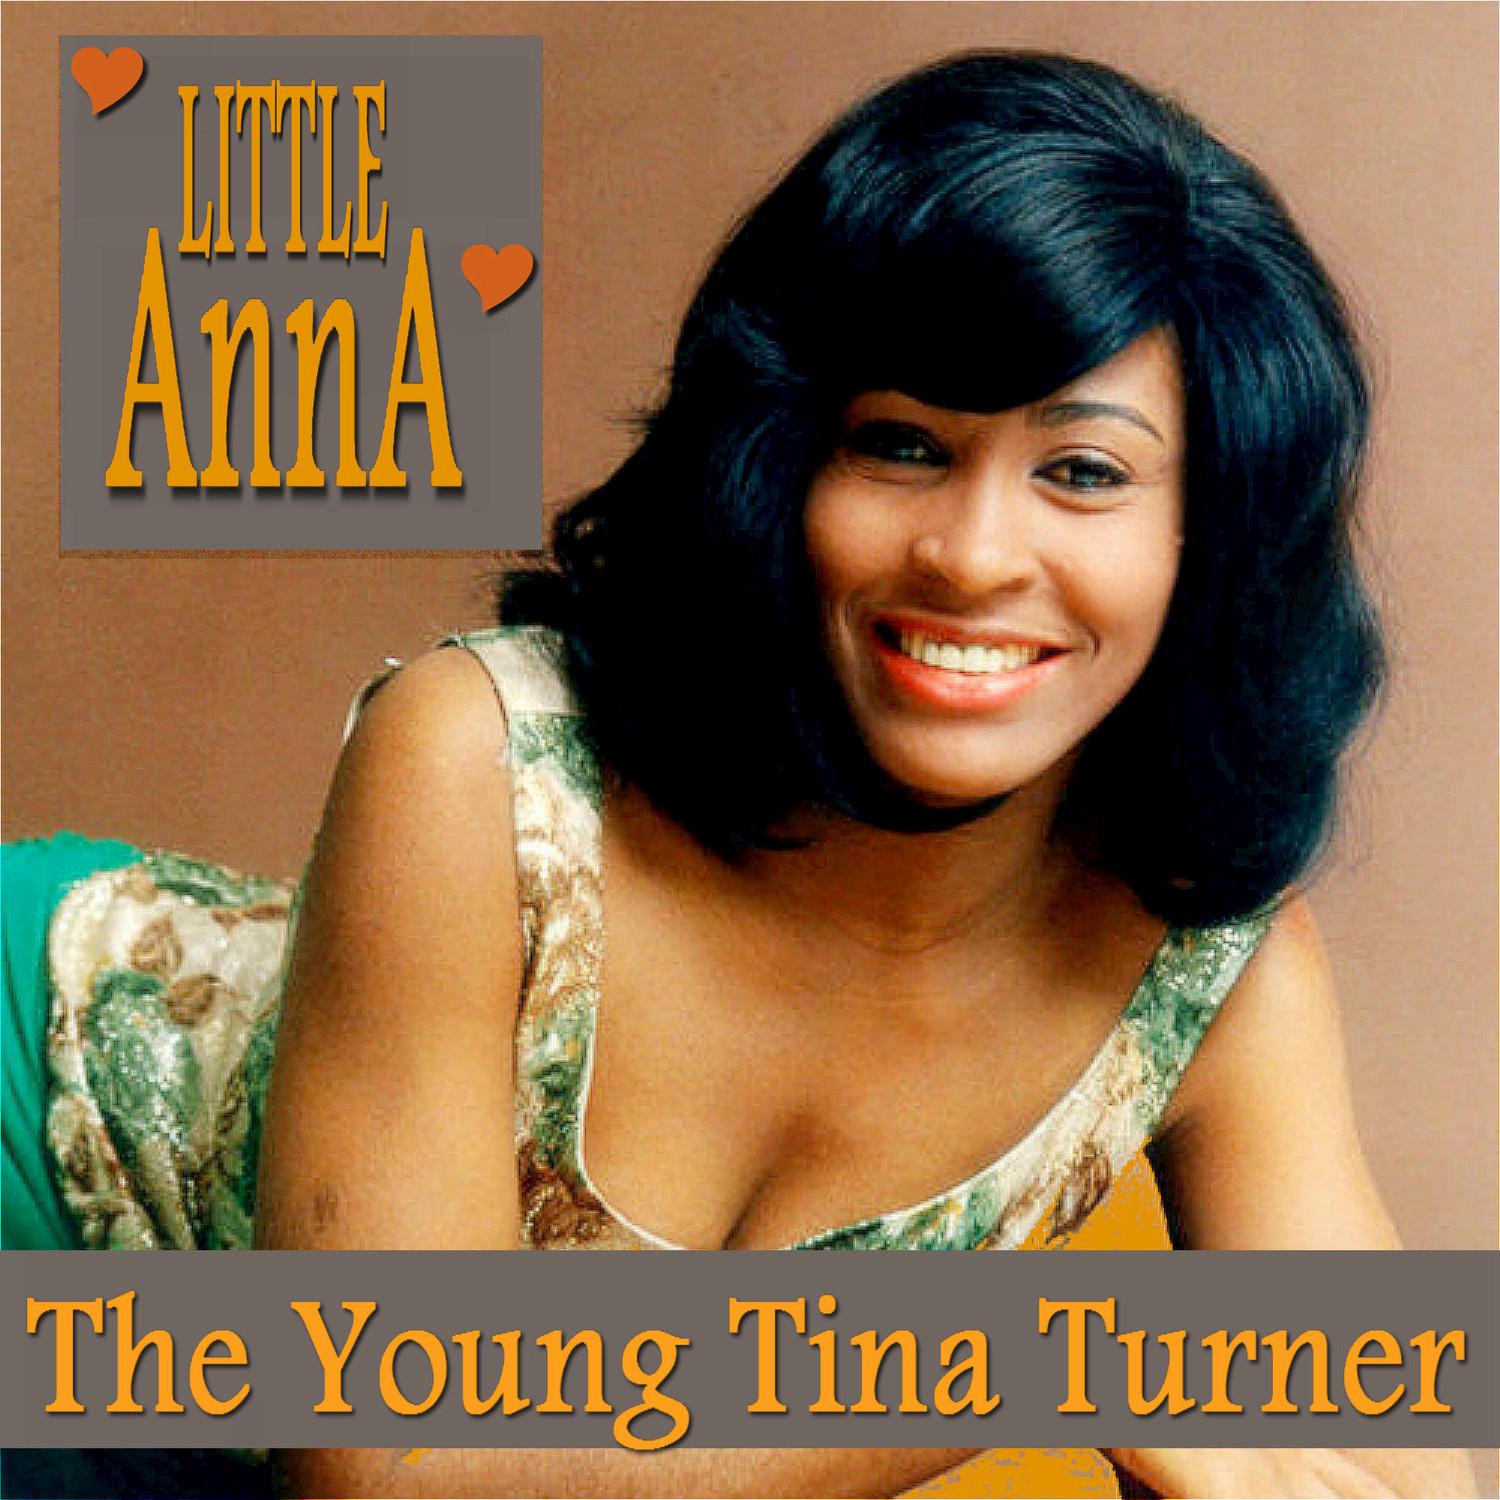 Little Anna 'The Young Tina Turner'专辑